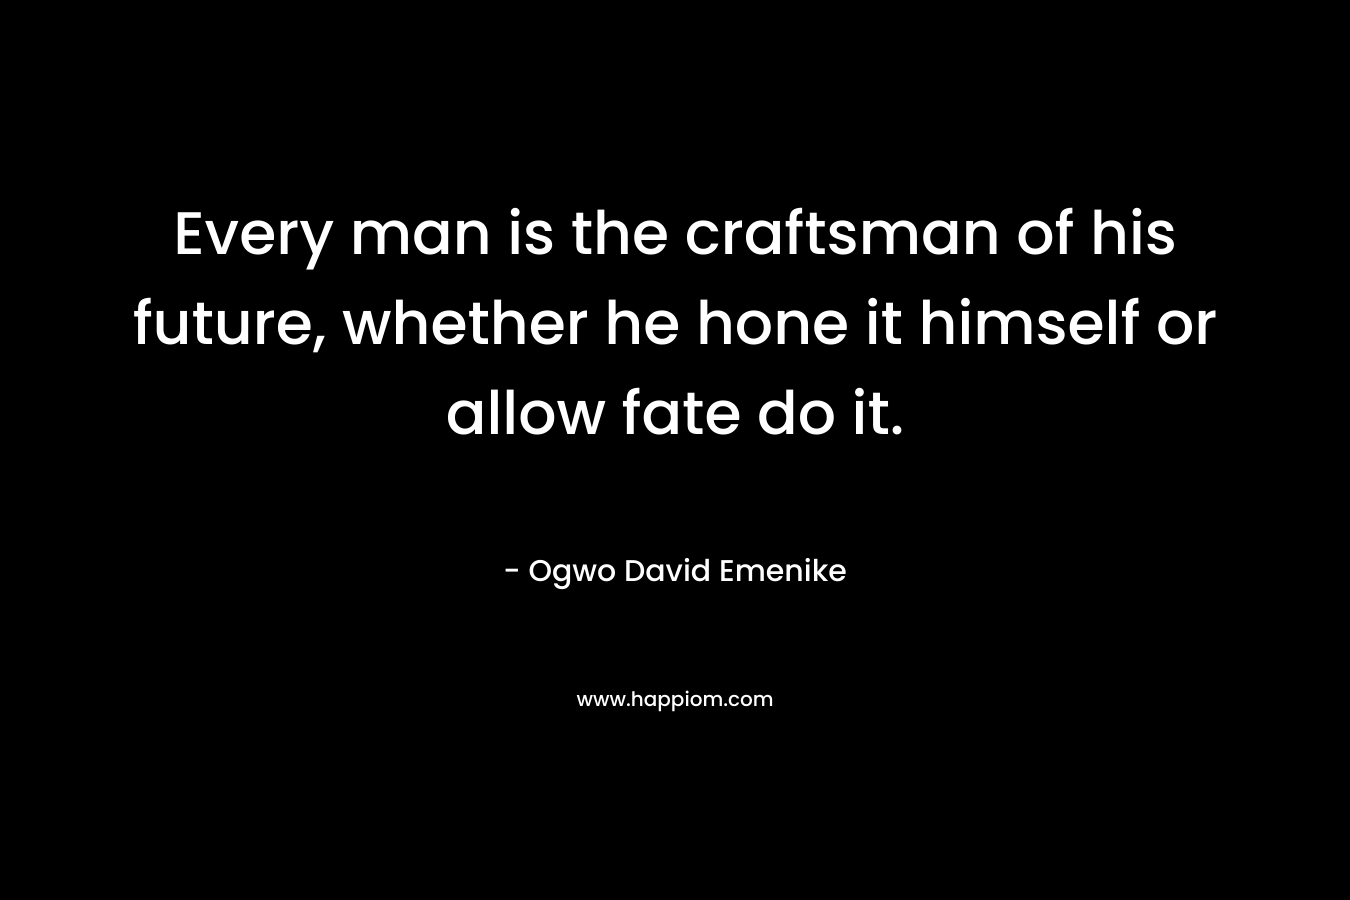 Every man is the craftsman of his future, whether he hone it himself or allow fate do it. – Ogwo David Emenike